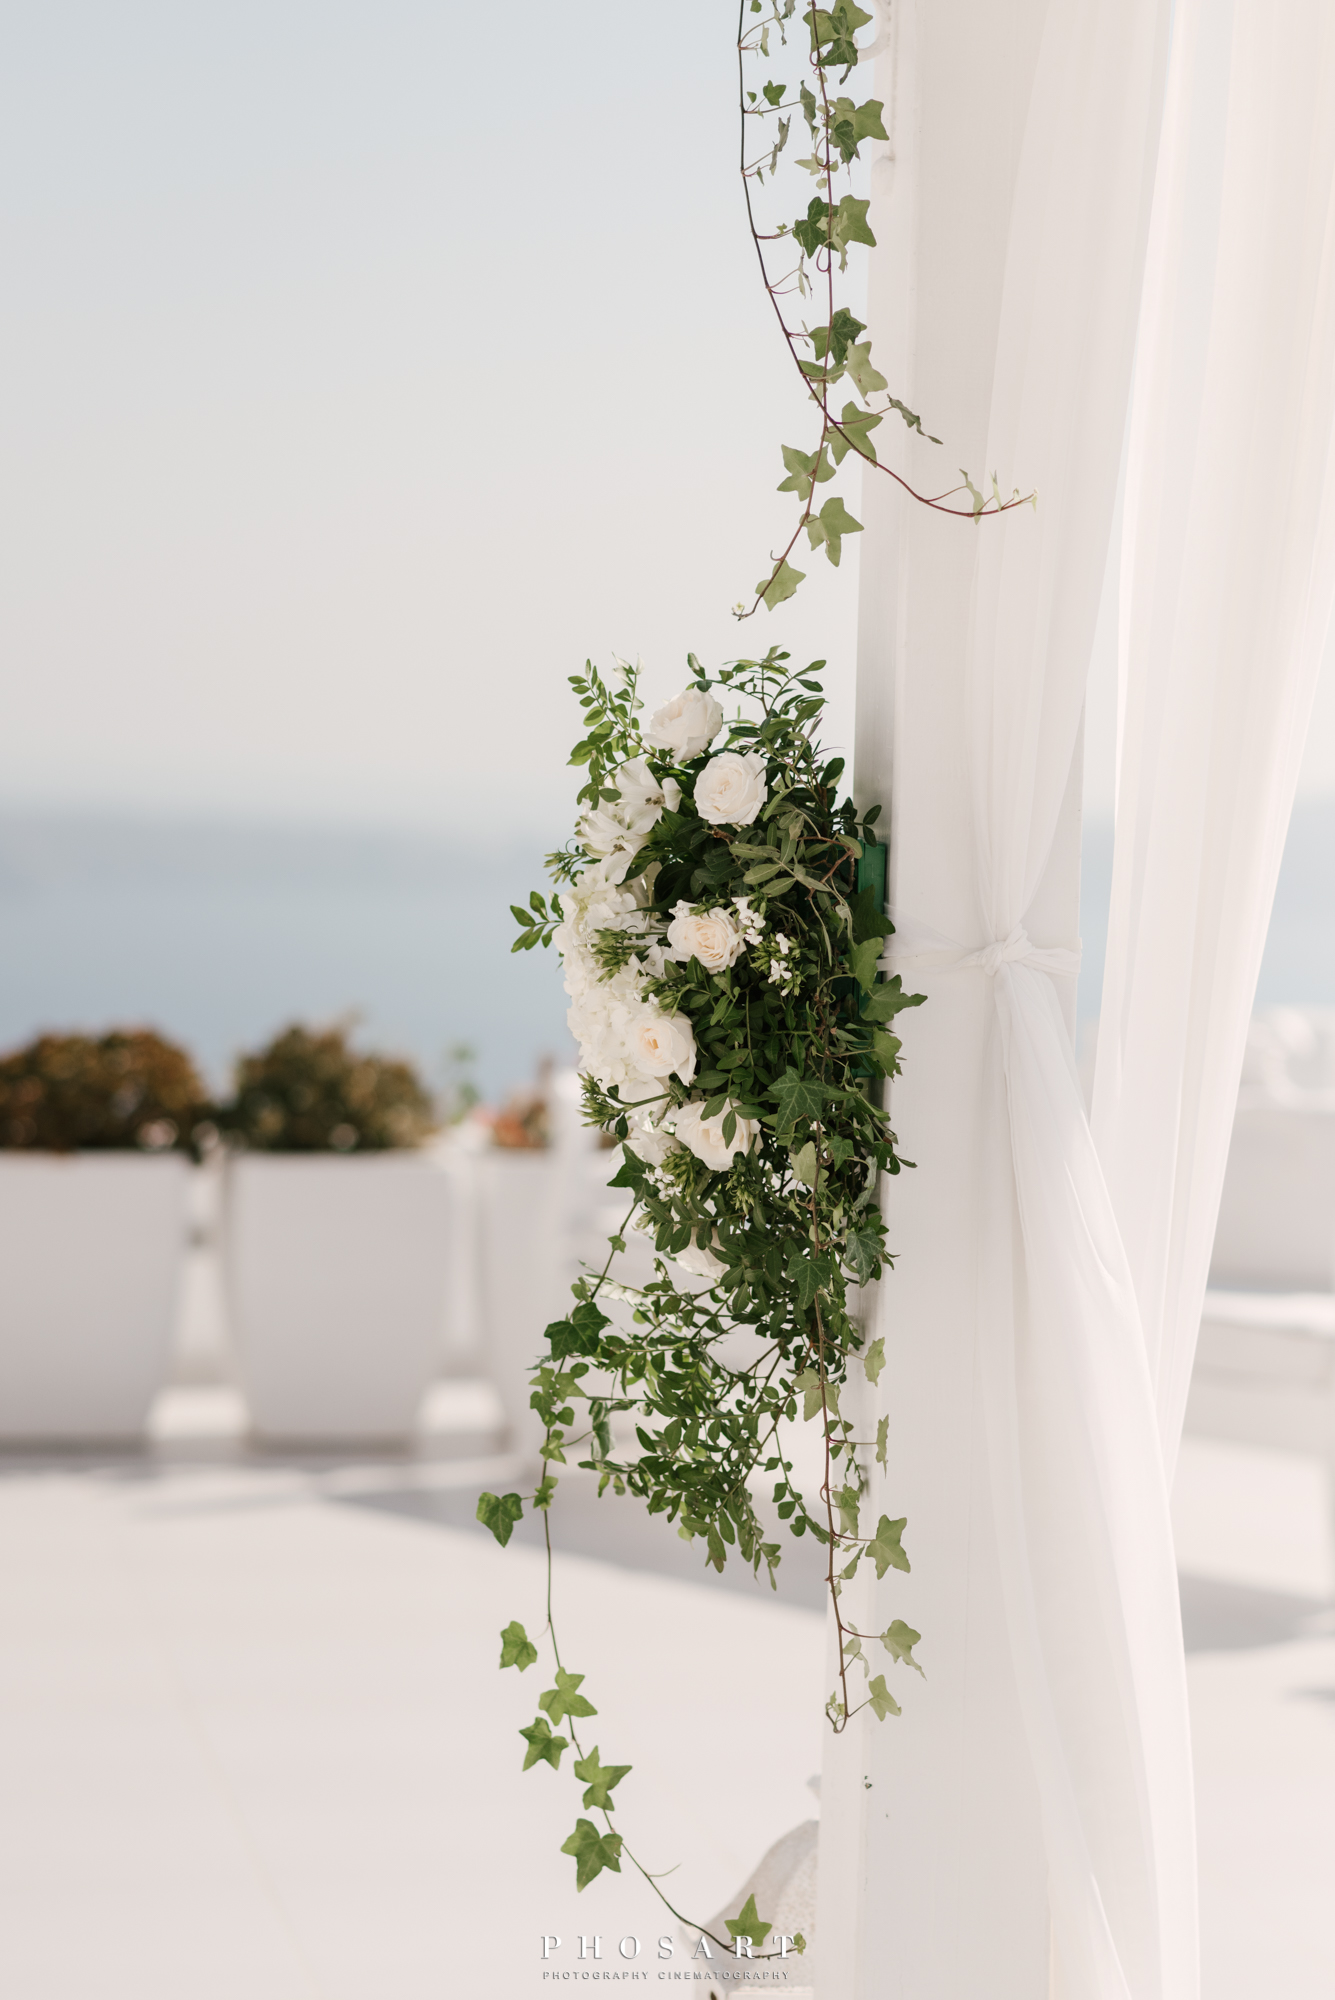 A bouquet of white flowers and ivy on a white curtain made of  gauze